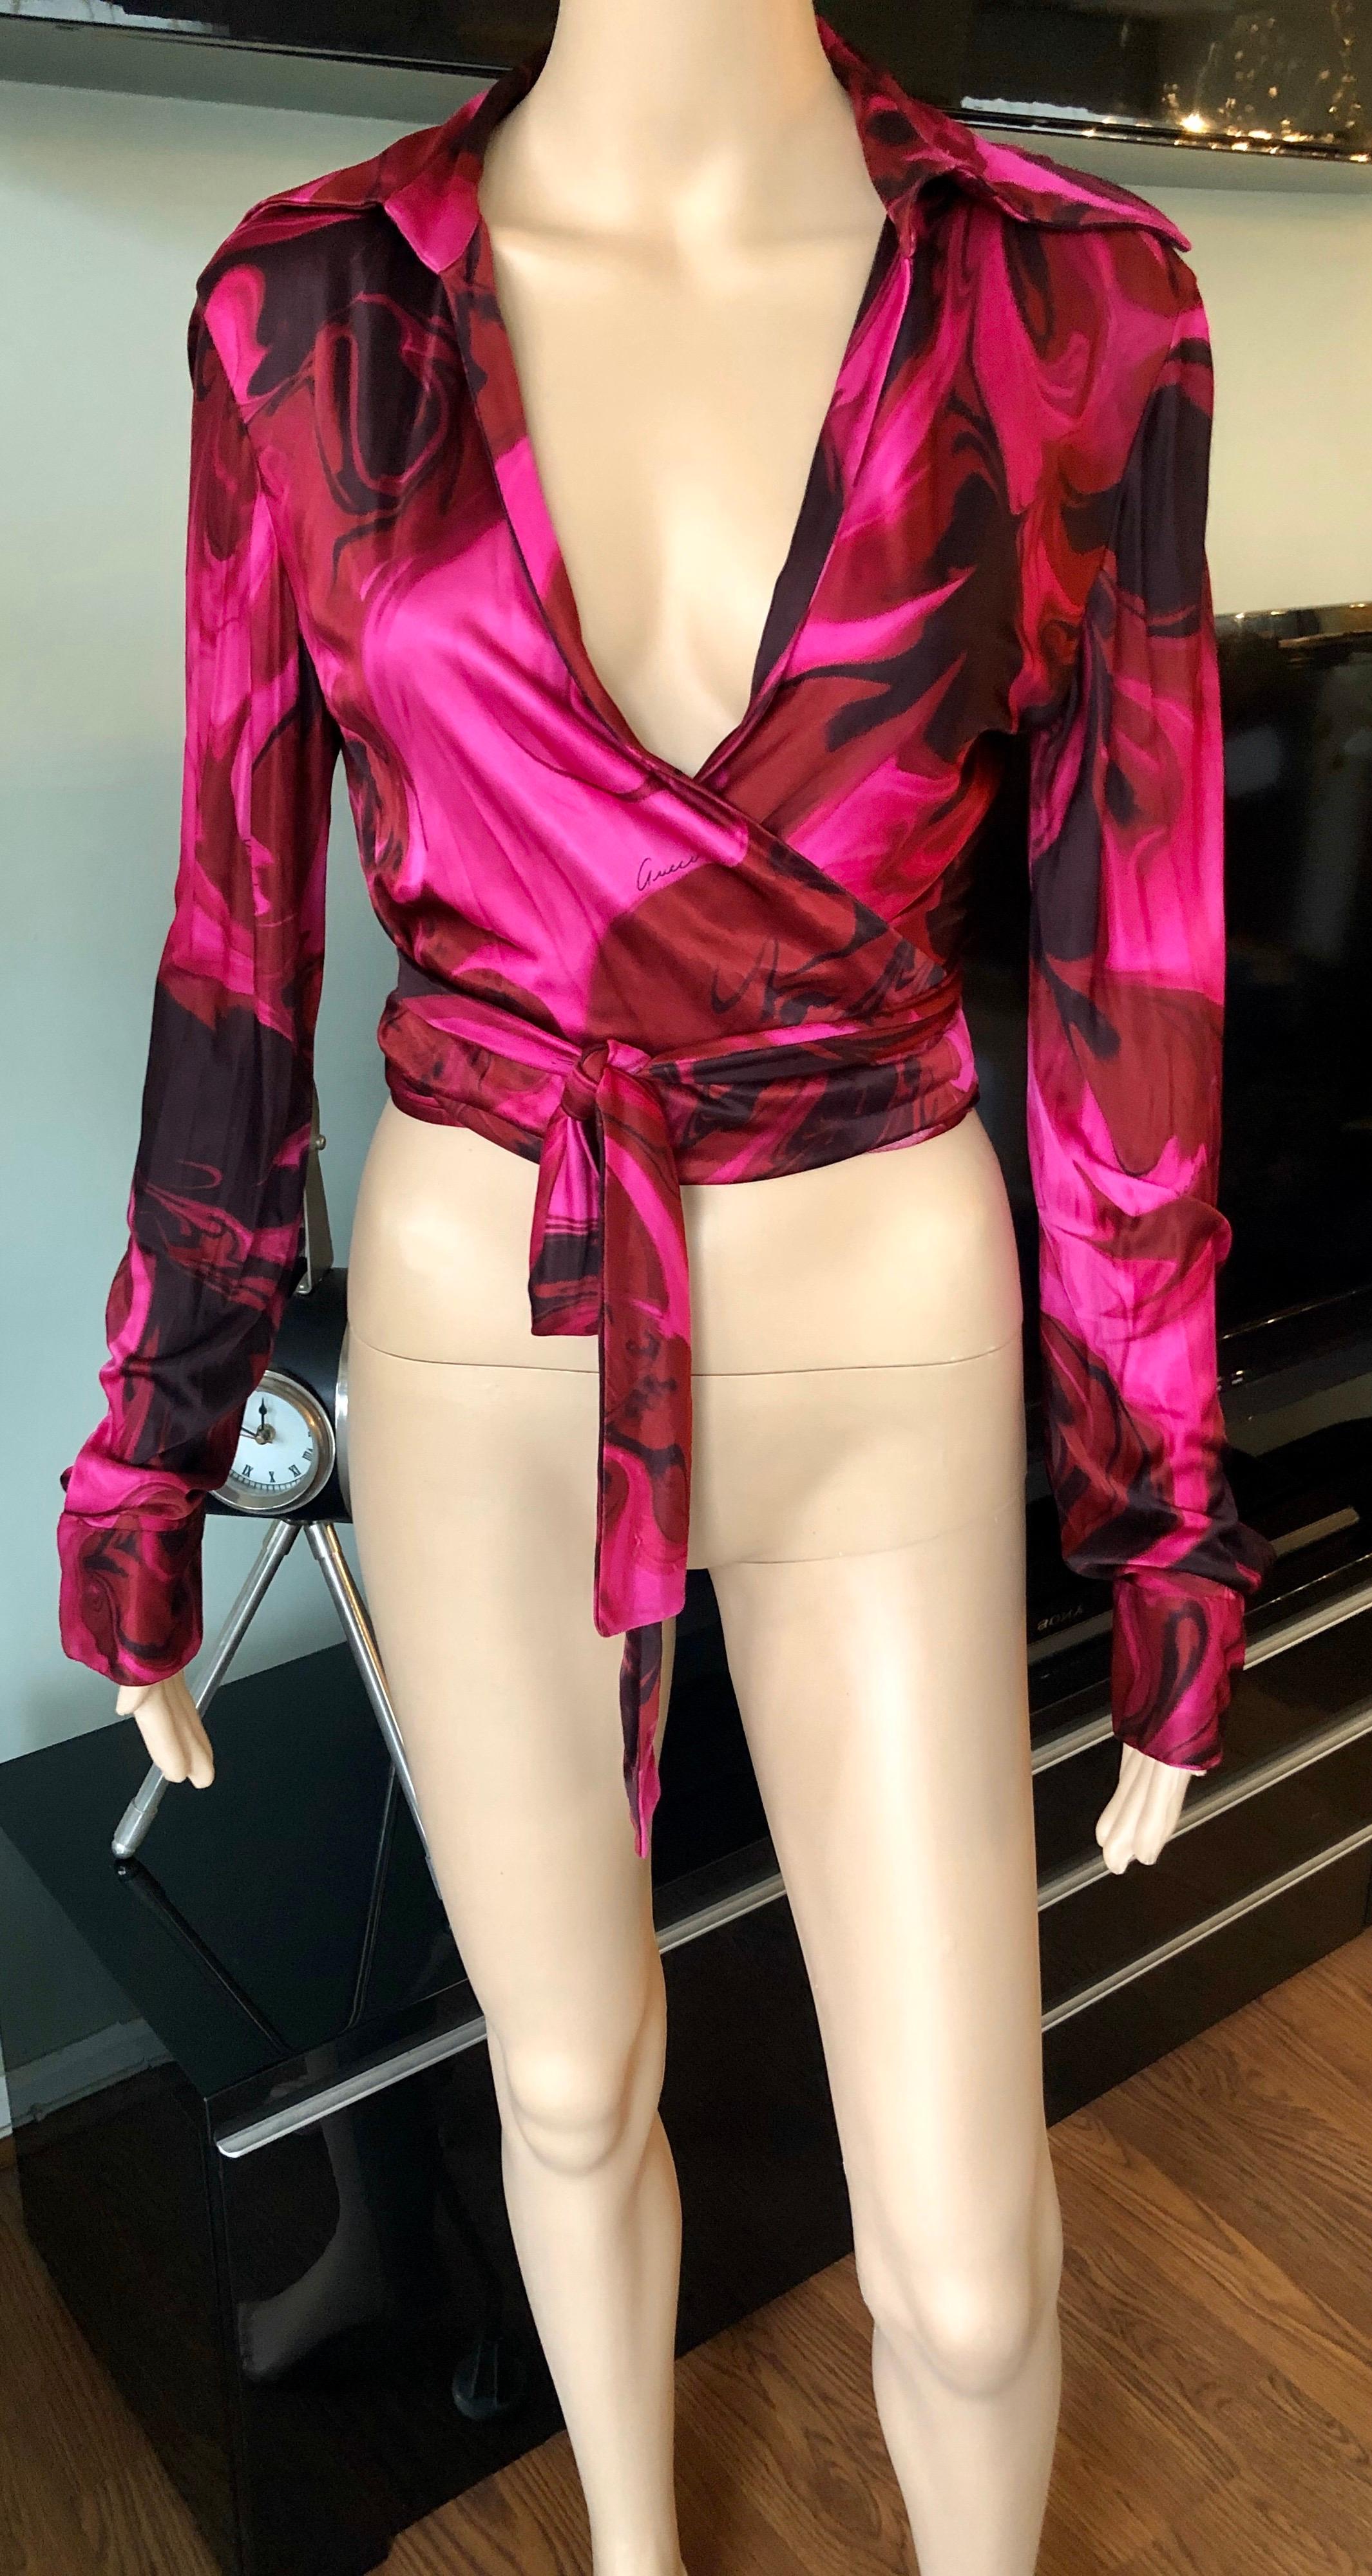 Tom Ford for Gucci S/S 2001 Plunging Neckline Wrap Crop Top Blouse IT 40

Gucci hot pink printed wrap crop top featuring plunging neckline, sash-tie closure at front and long sleeves.